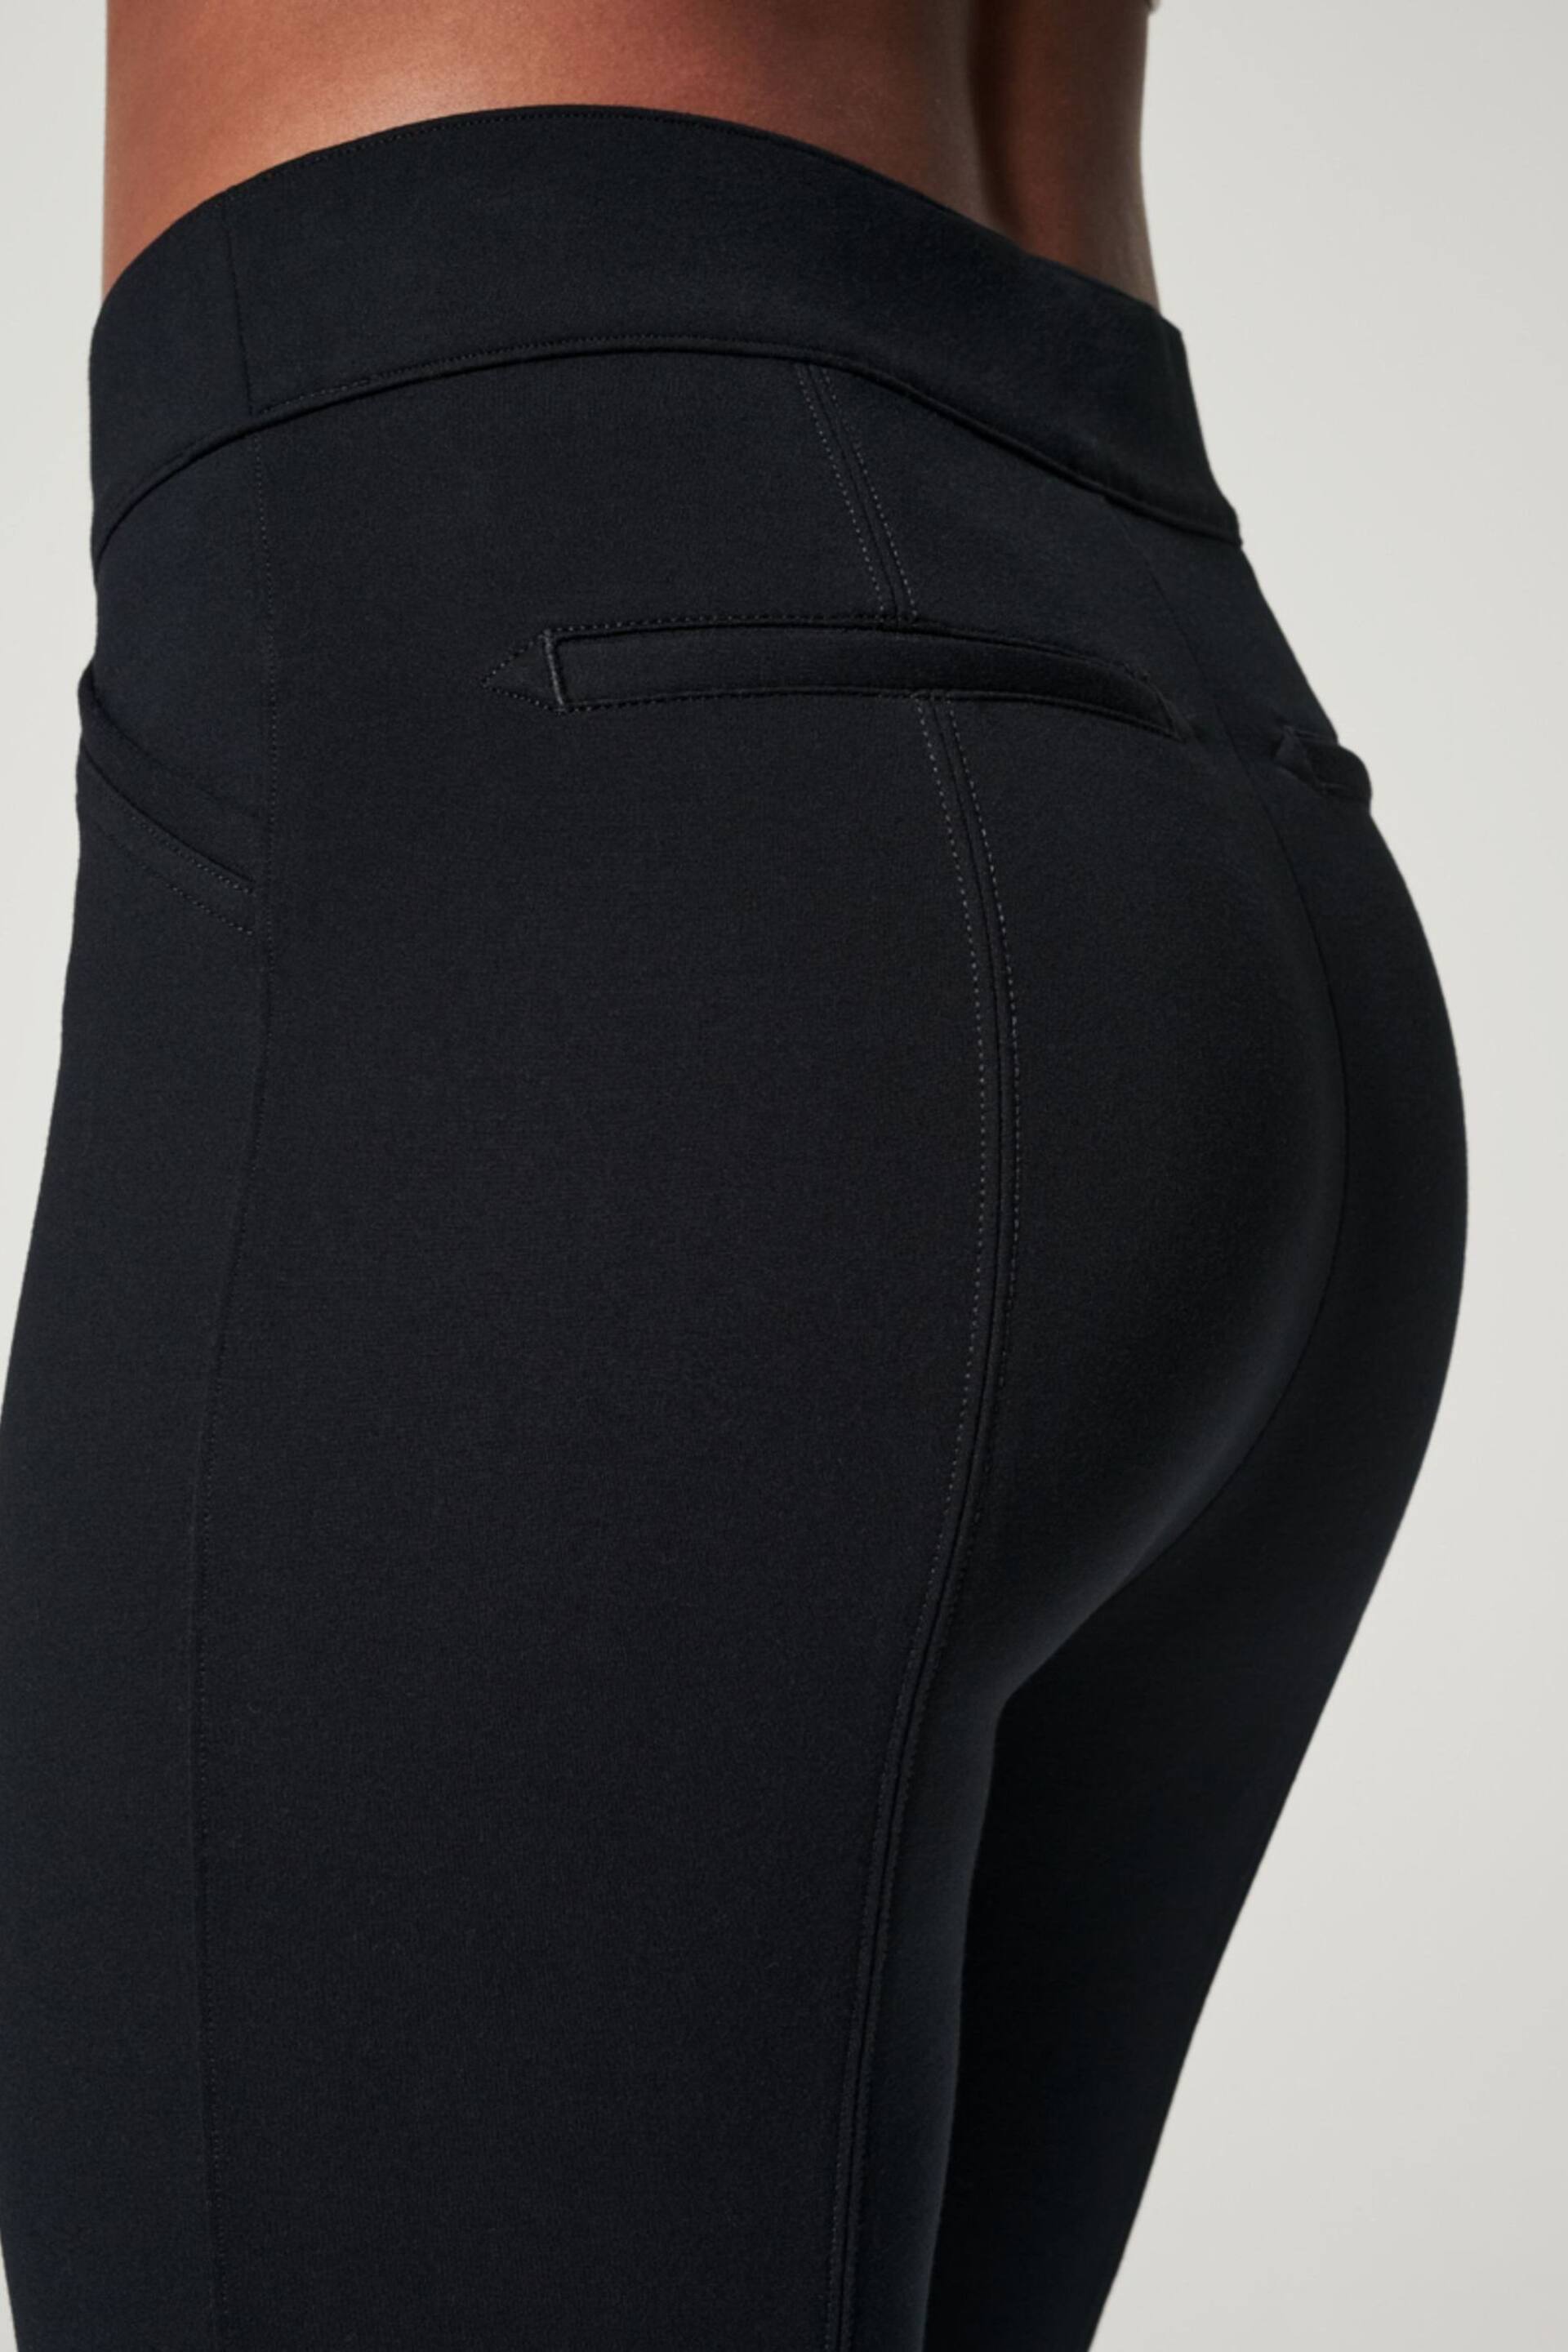 SPANX® Medium Control The Perfect Trousers, Back Seam Skinny - Image 5 of 7